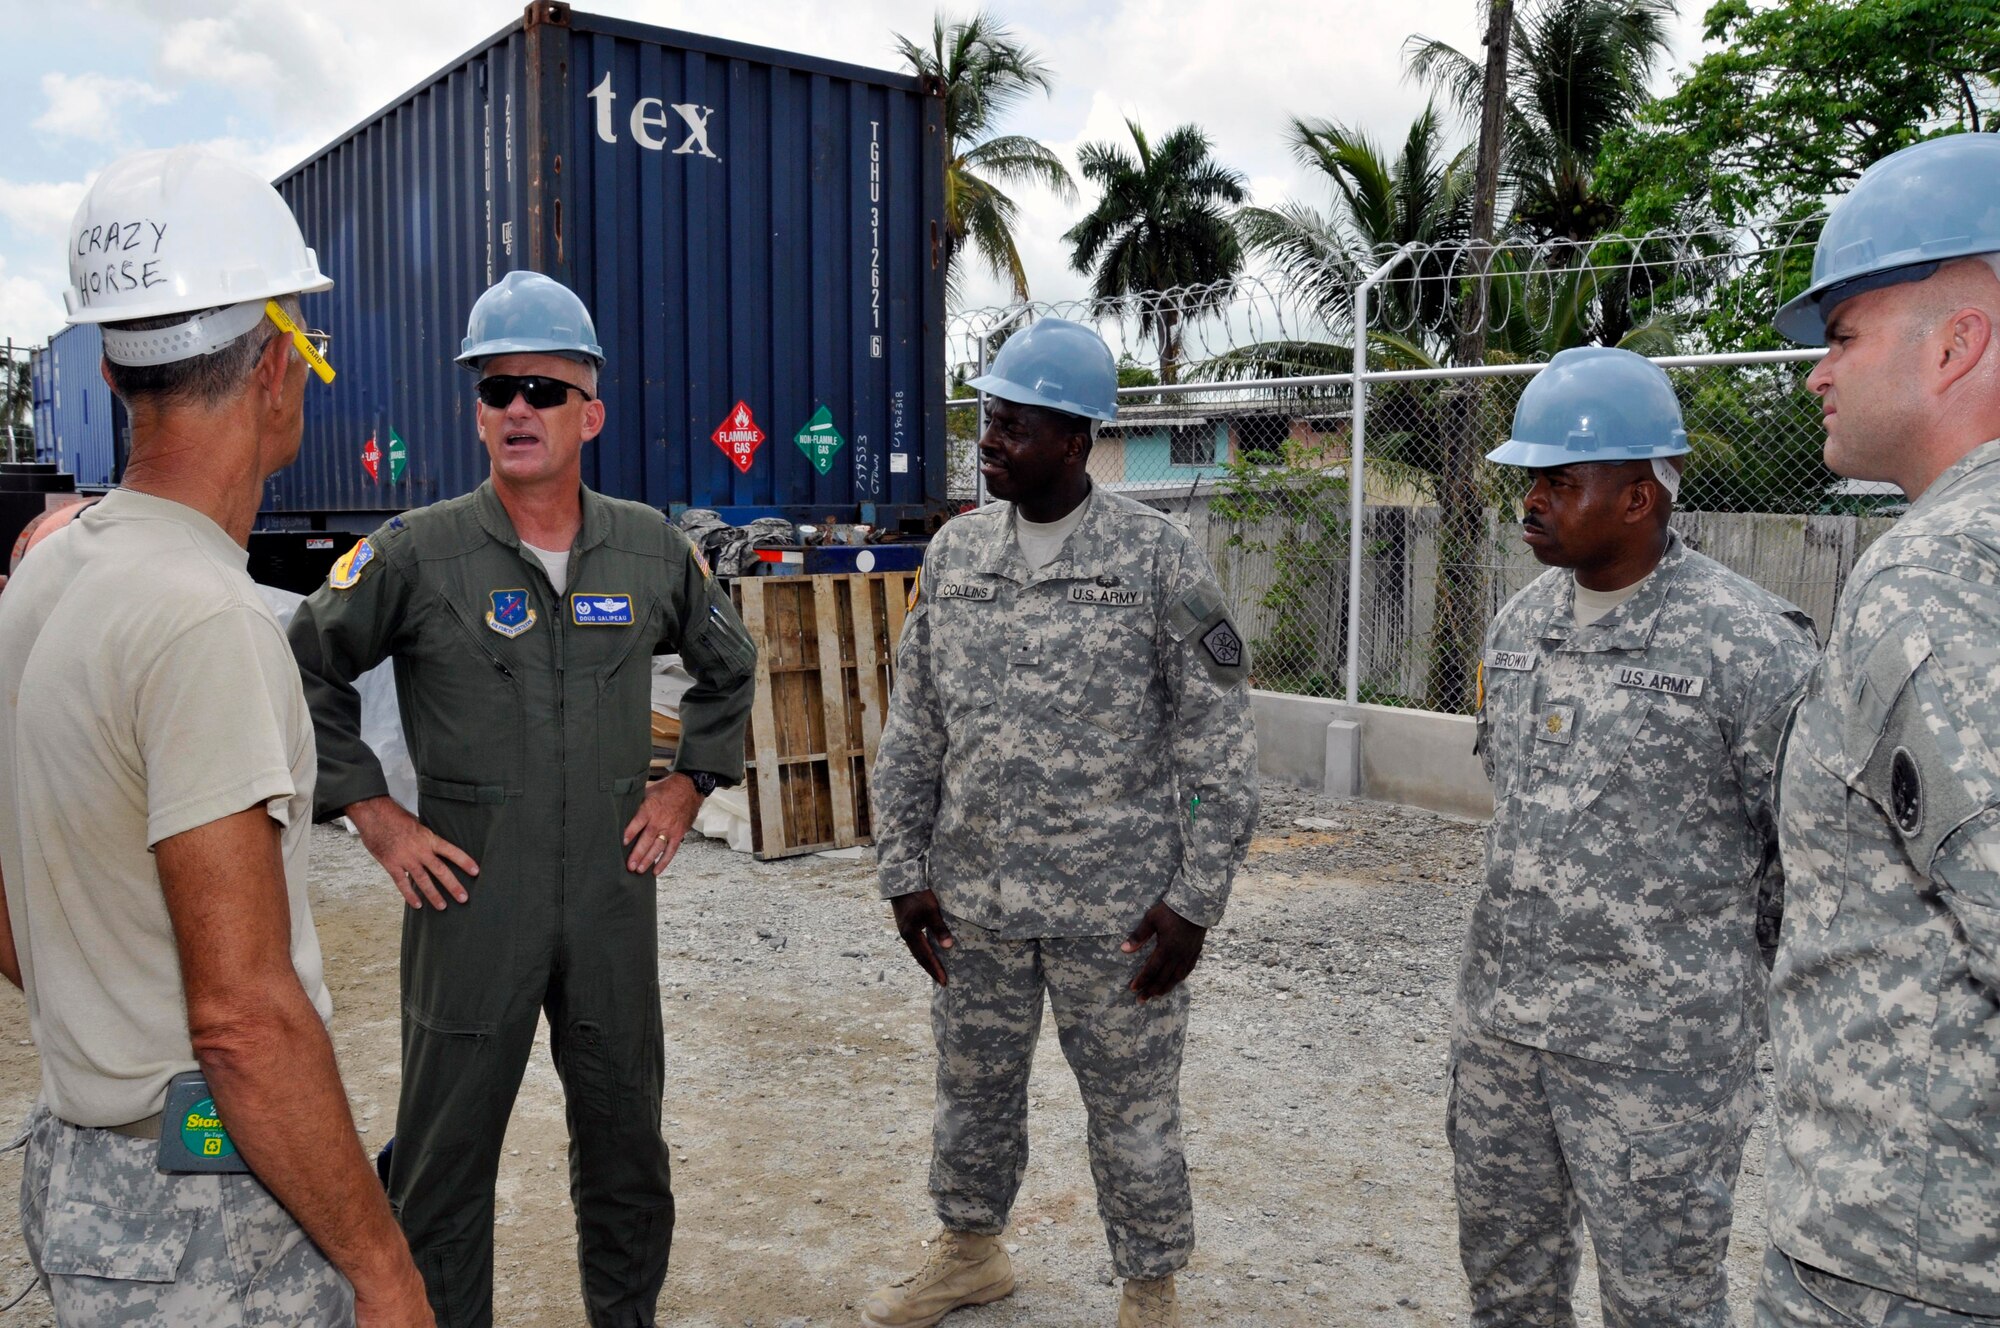 Col. Douglas Galipeau, 474th Air Expeditionary Group Commander speaks with Soldiers from the Georgia Army National Guard, Aug 20, 2009 at a new Medical Clinic in Georgetown, Guyana. Col. Galipeau visited two Medical Readiness and Training Exercises, one Dental Readiness and Training Exercise, an orphanage, and two construction projects all part of New Horizons Guyana. (U.S. Air Force photo by Airman 1st Class Perry Aston) (Released)